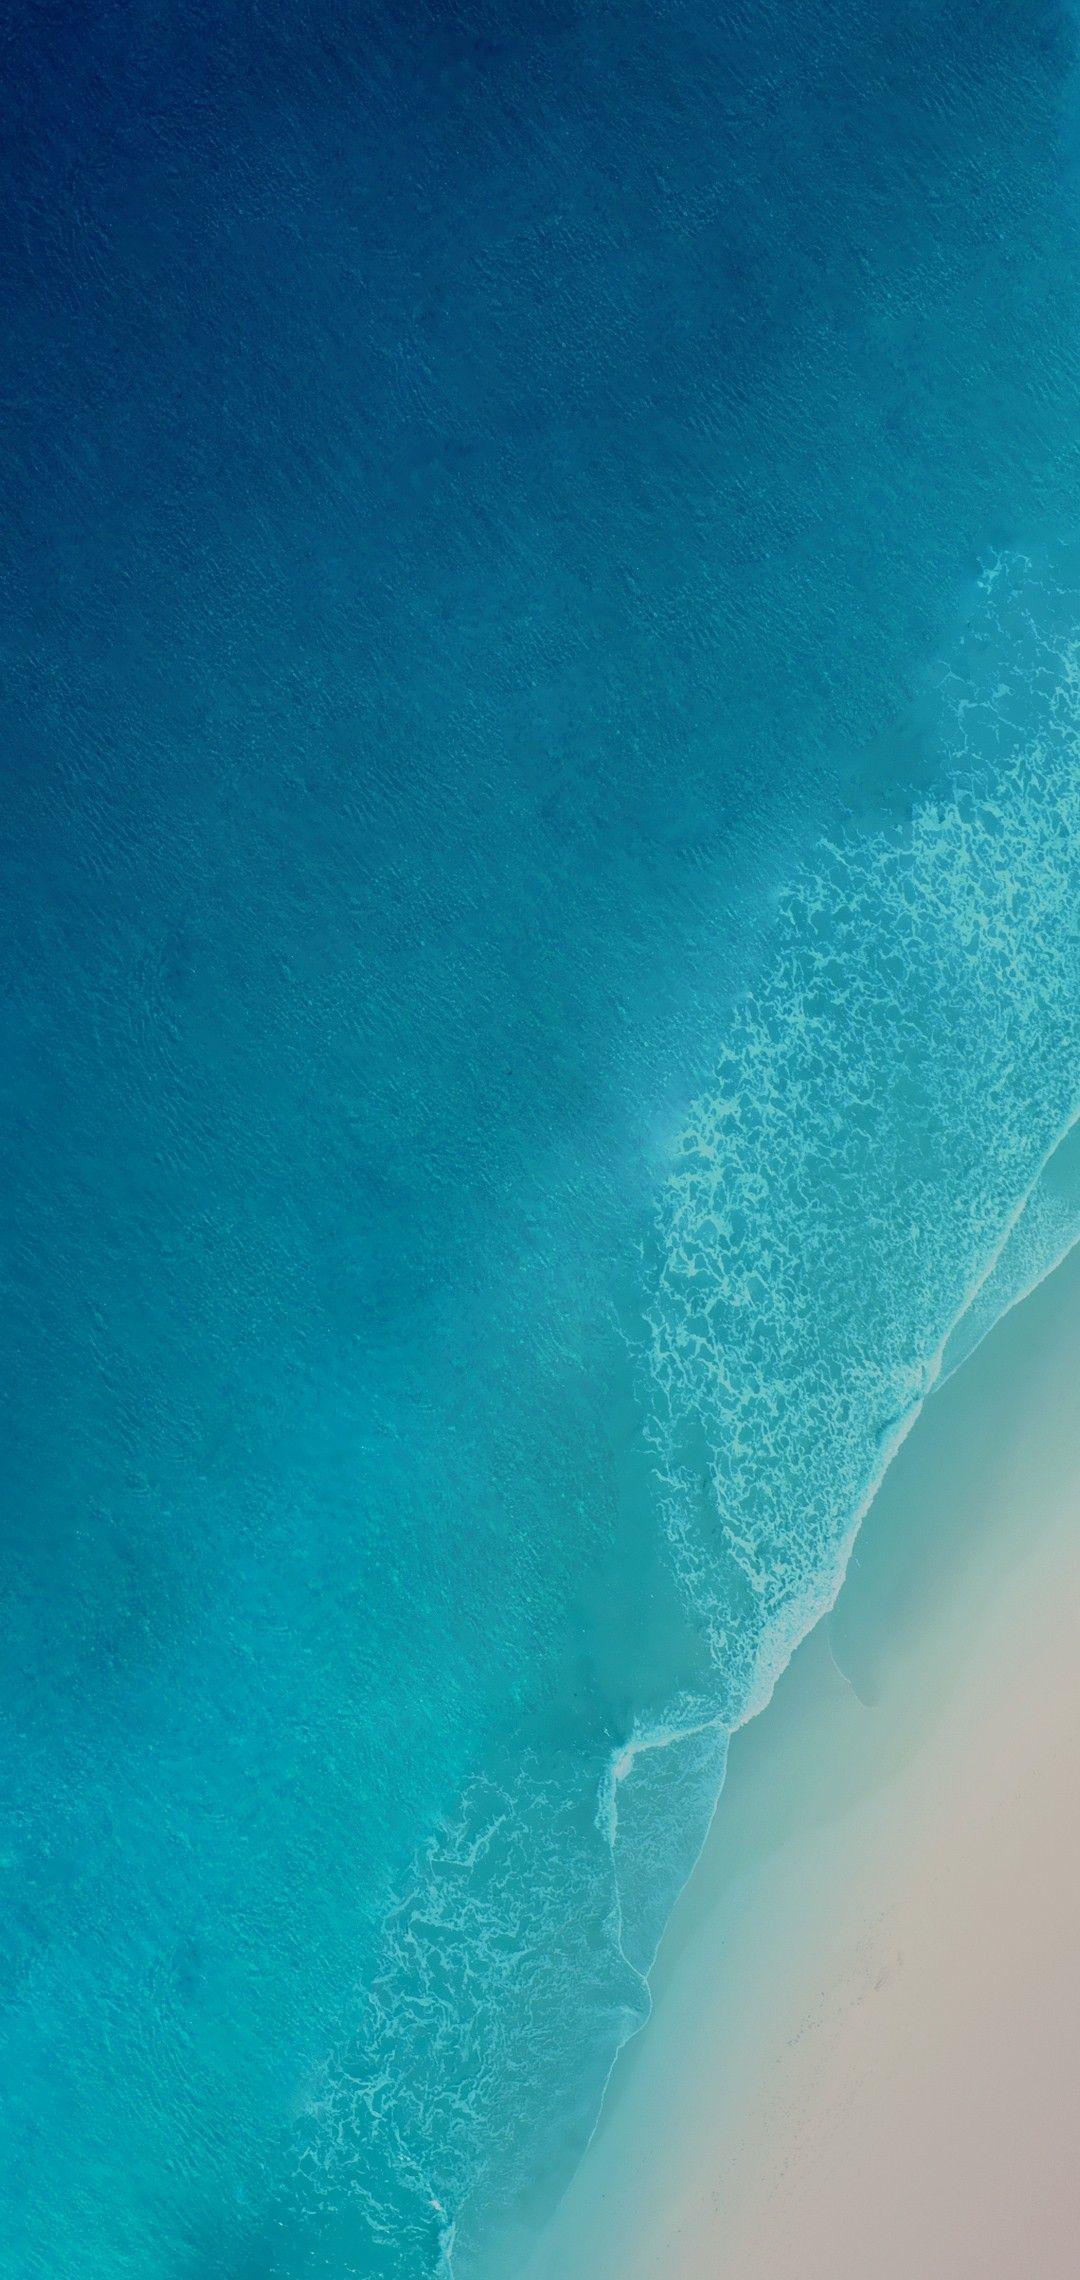 294530 Blue Aqua Water Turquoise Teal Apple iPhone XR wallpaper free  download 828x1792  Rare Gallery HD Wallpapers